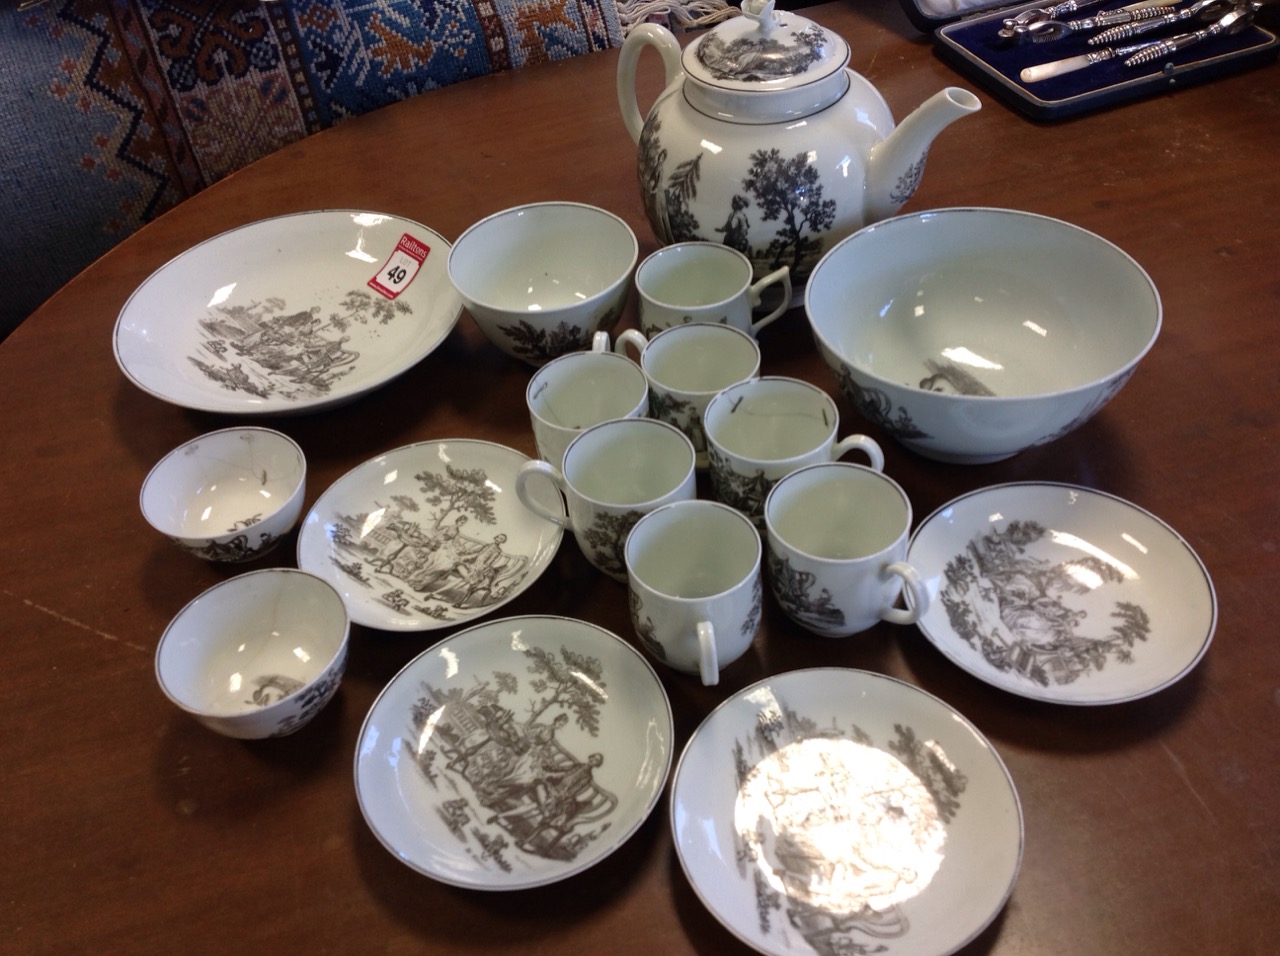 A nineteenth century Worcester monochrome Hancock printed teaset with teapot & cover, slop bowl, - Image 3 of 3